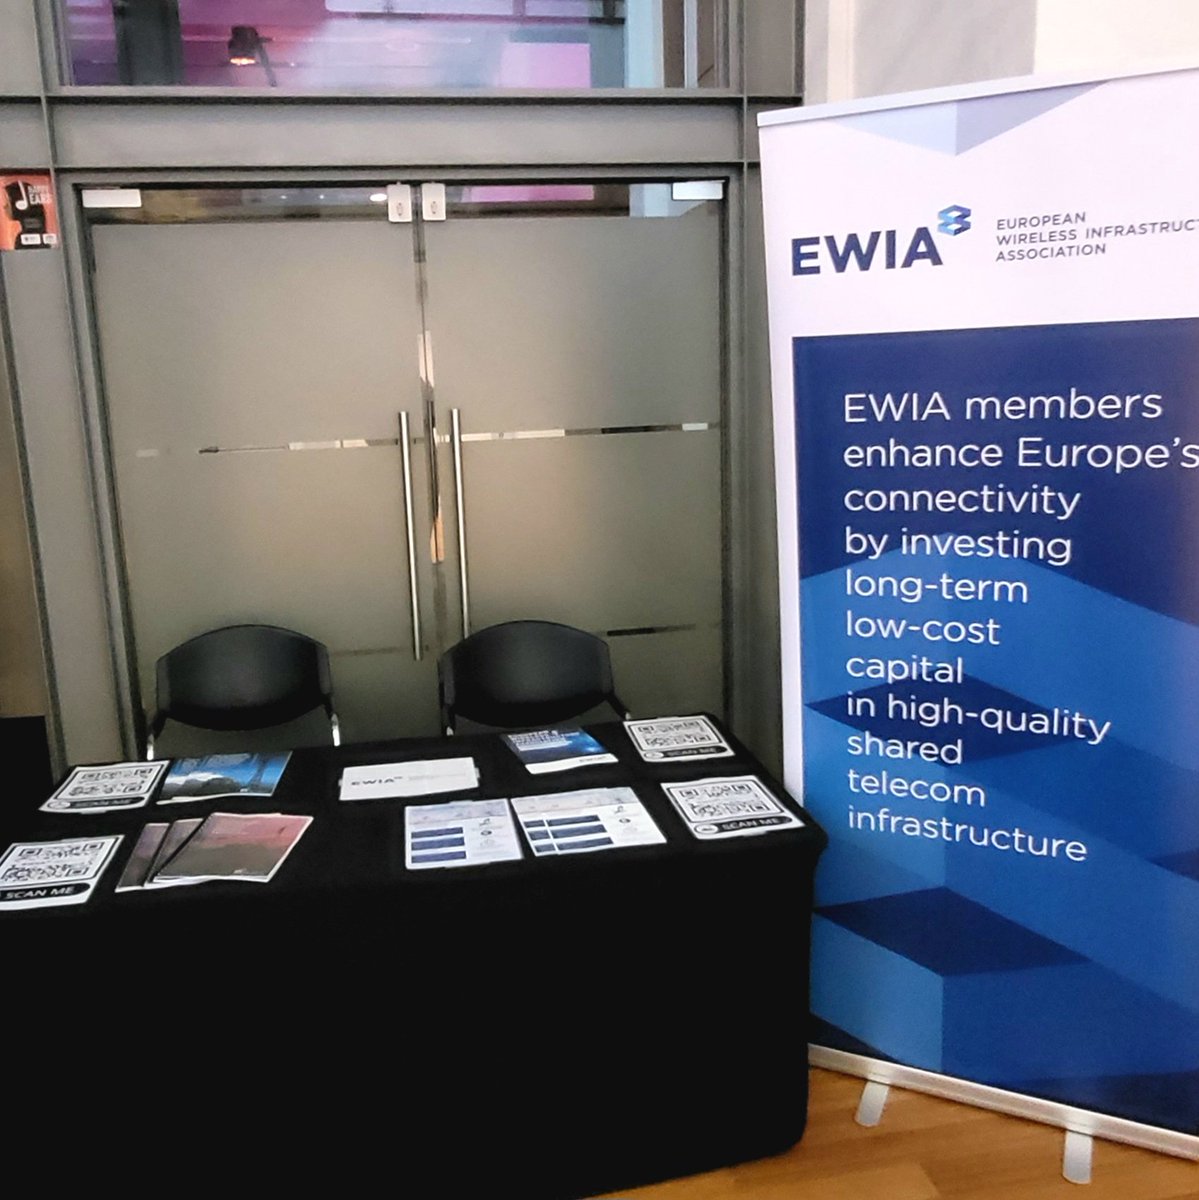 Welcome to @EWIASecretariat booth at #EU5GConf with new report from @ParthenonEY hot off the press on the sustainability contribution of independent towercos